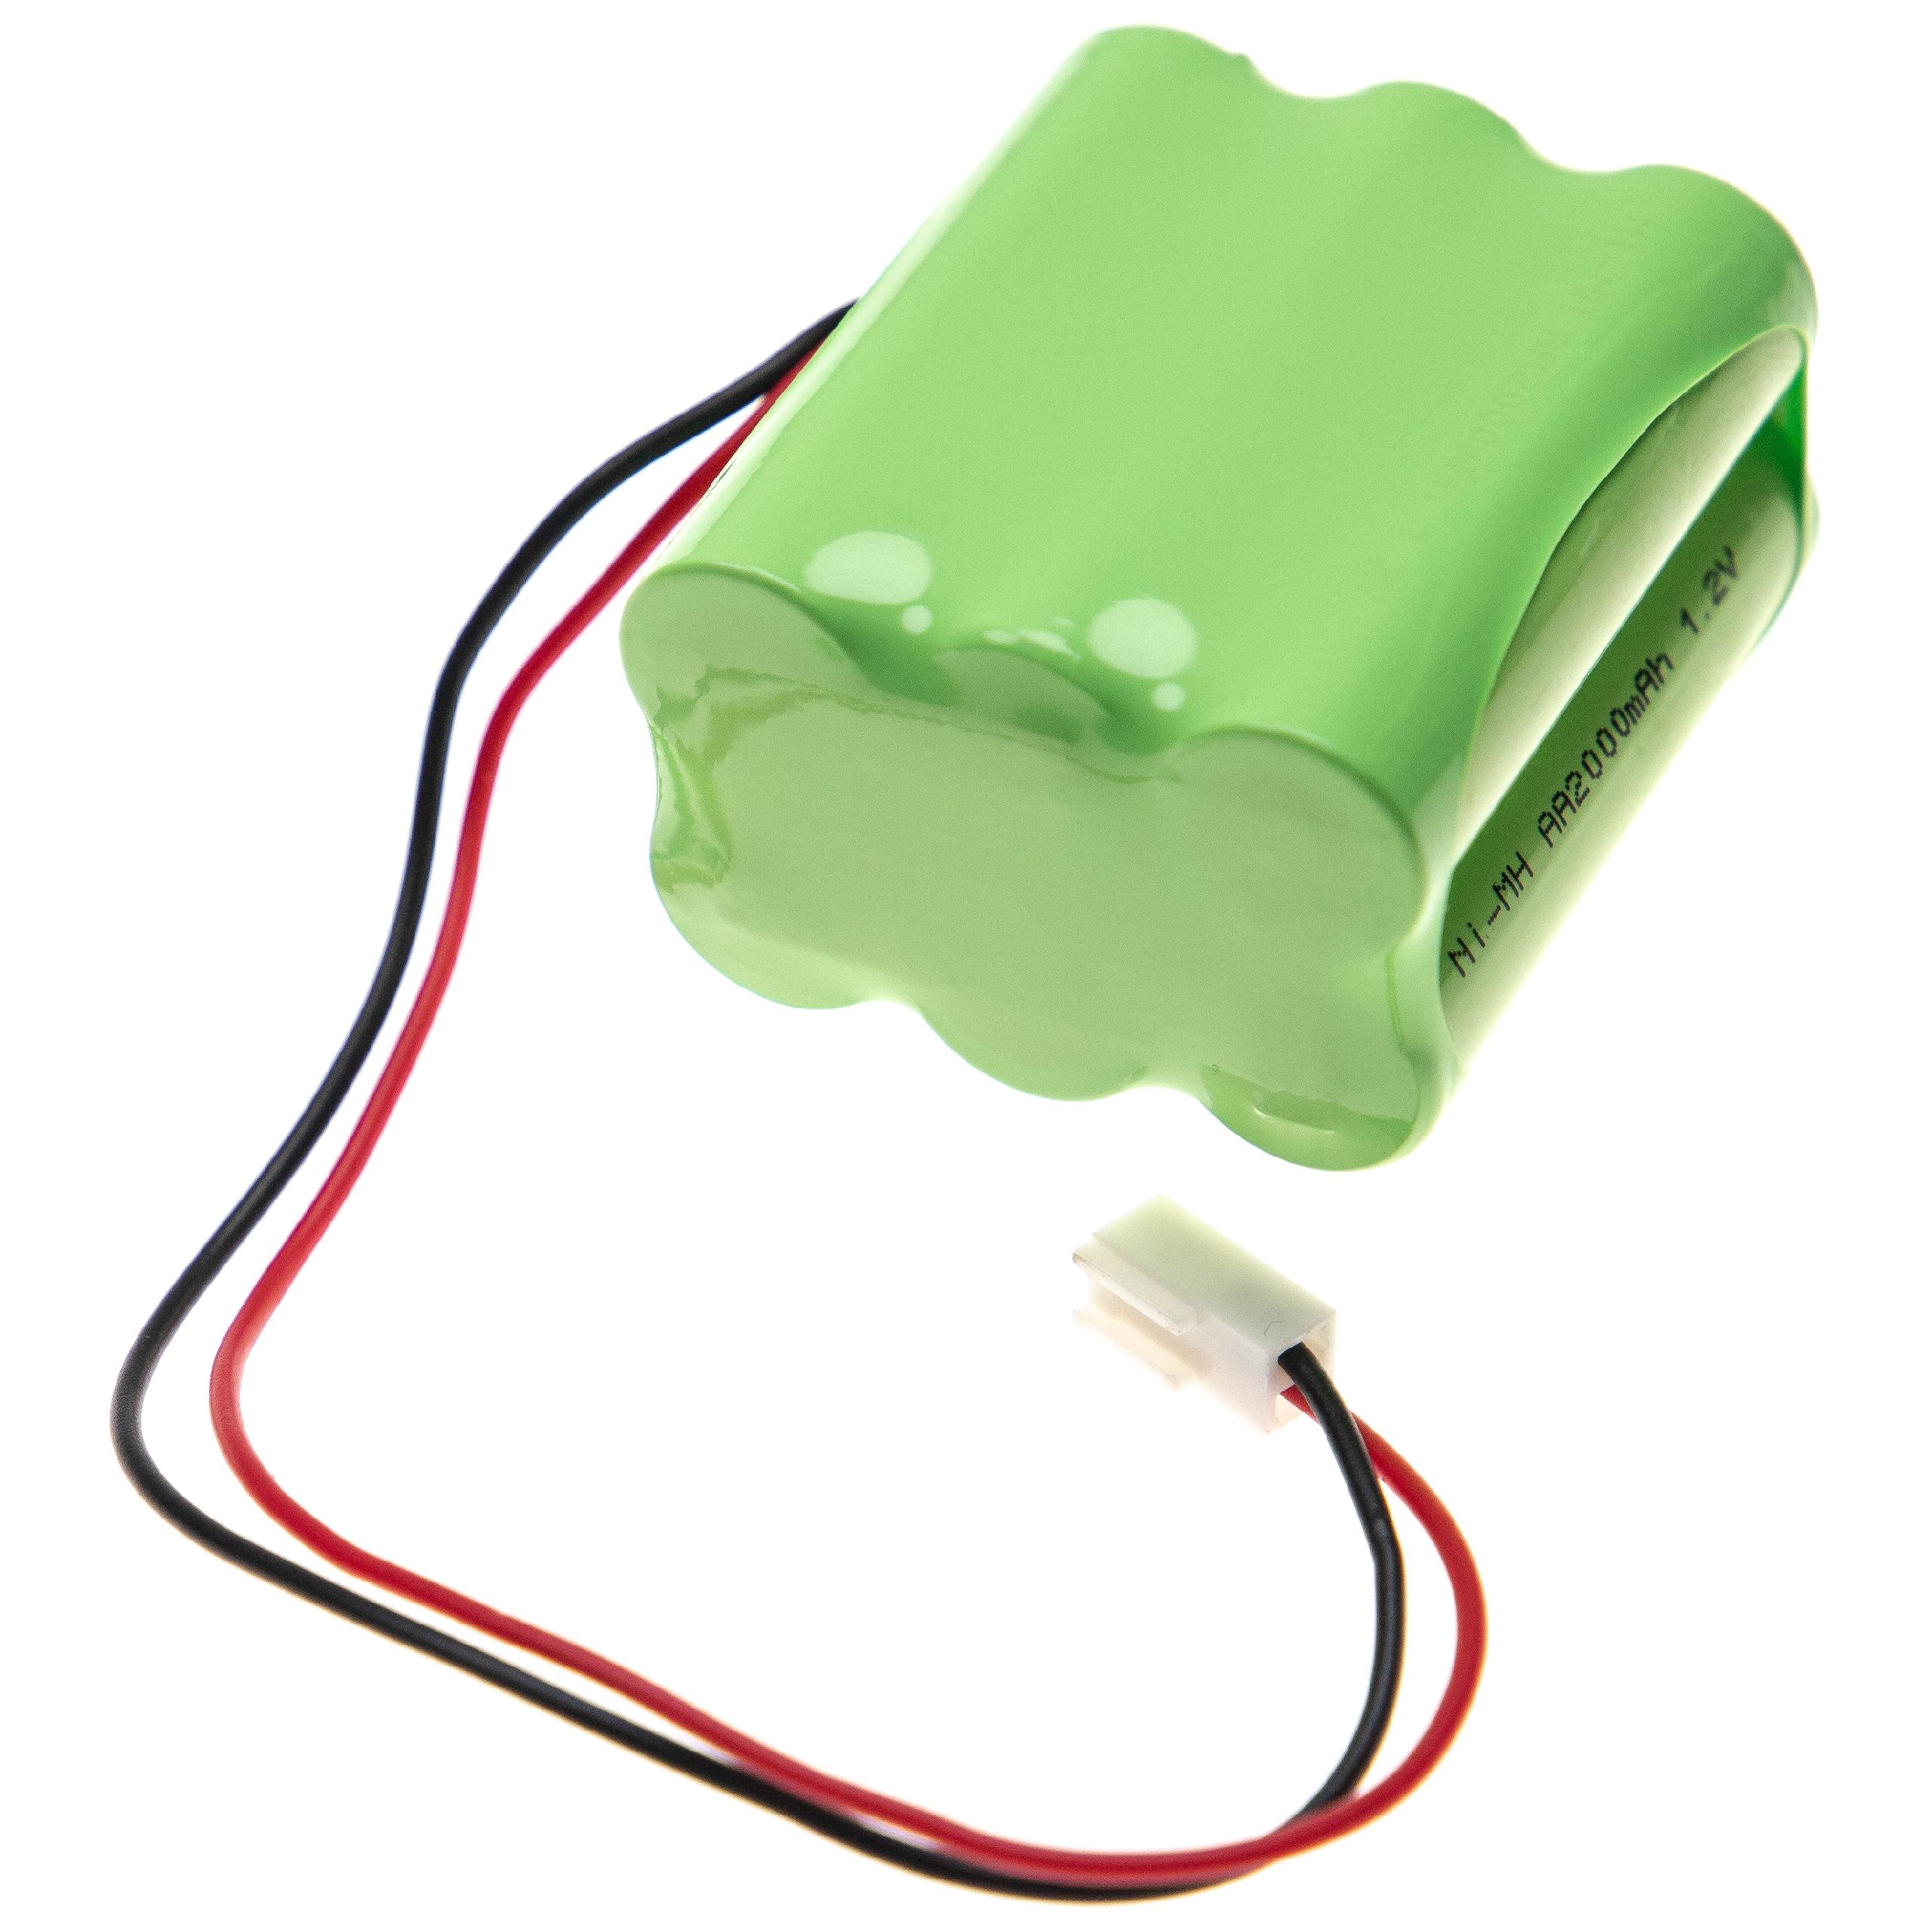 Alarm System Battery Replacement for ESP / Marmitek 11AAAH6YMX, GP150AAM6YMX, GP220AAM6YMX - 2000mAh 7.2V NiMH